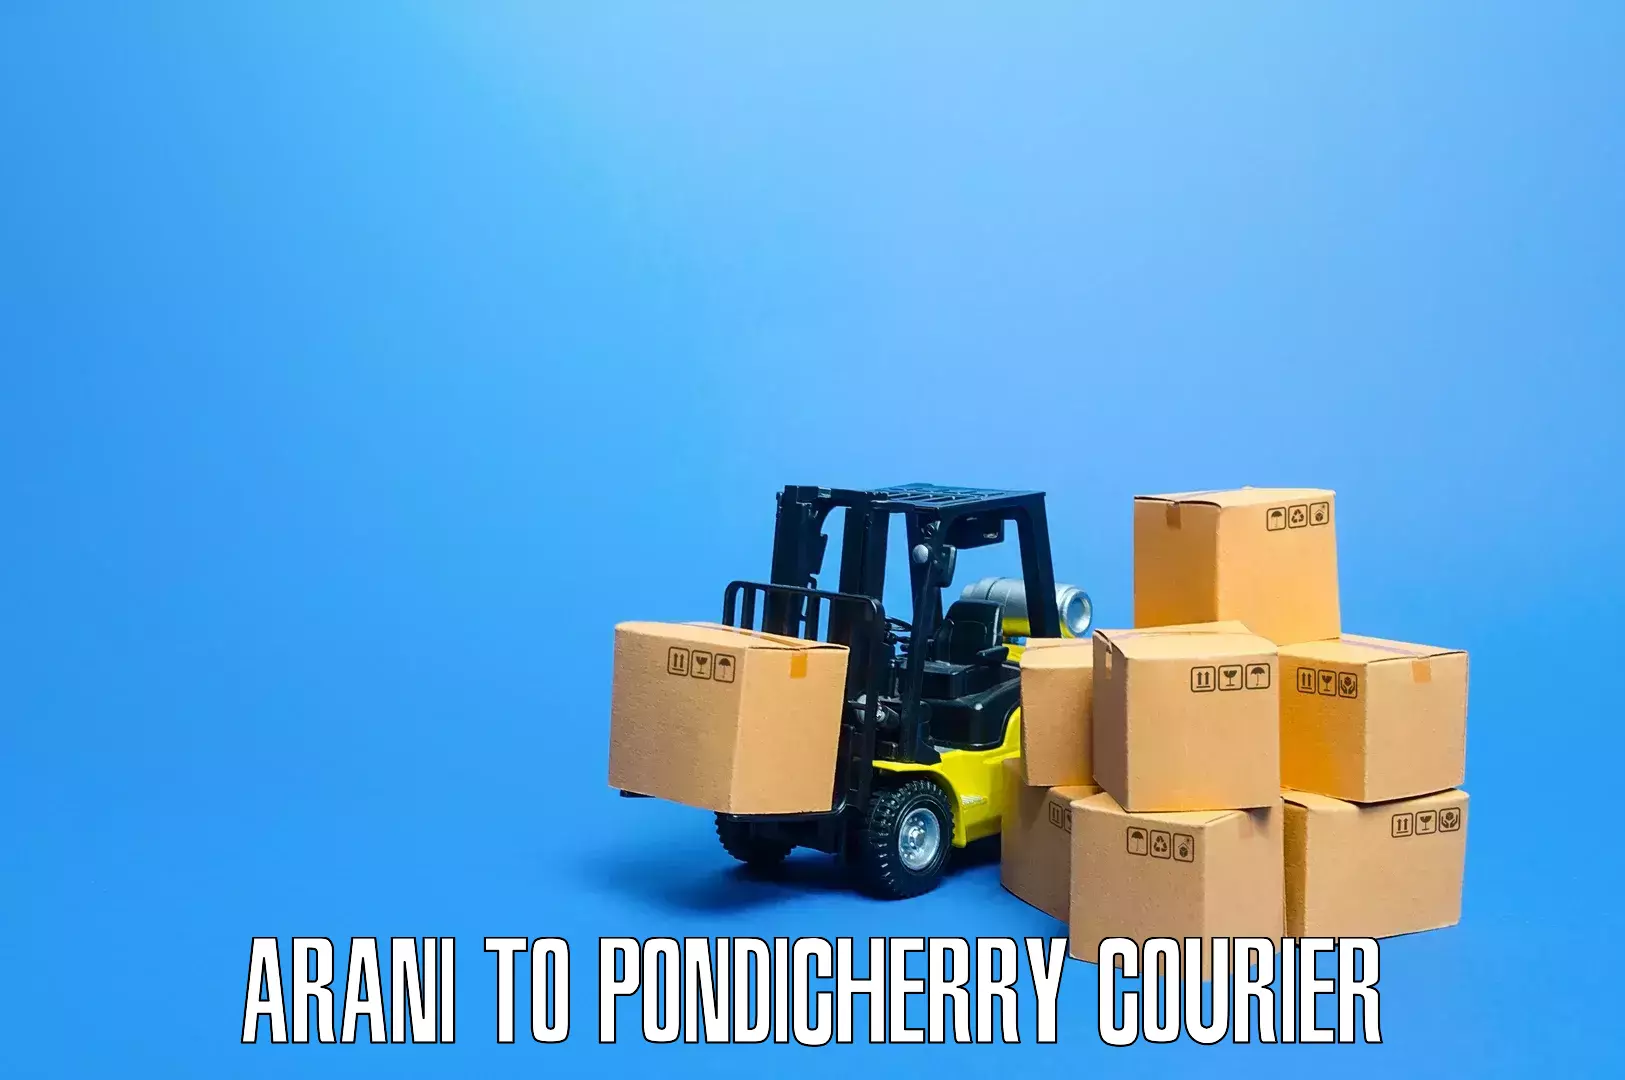 Residential moving experts Arani to Pondicherry